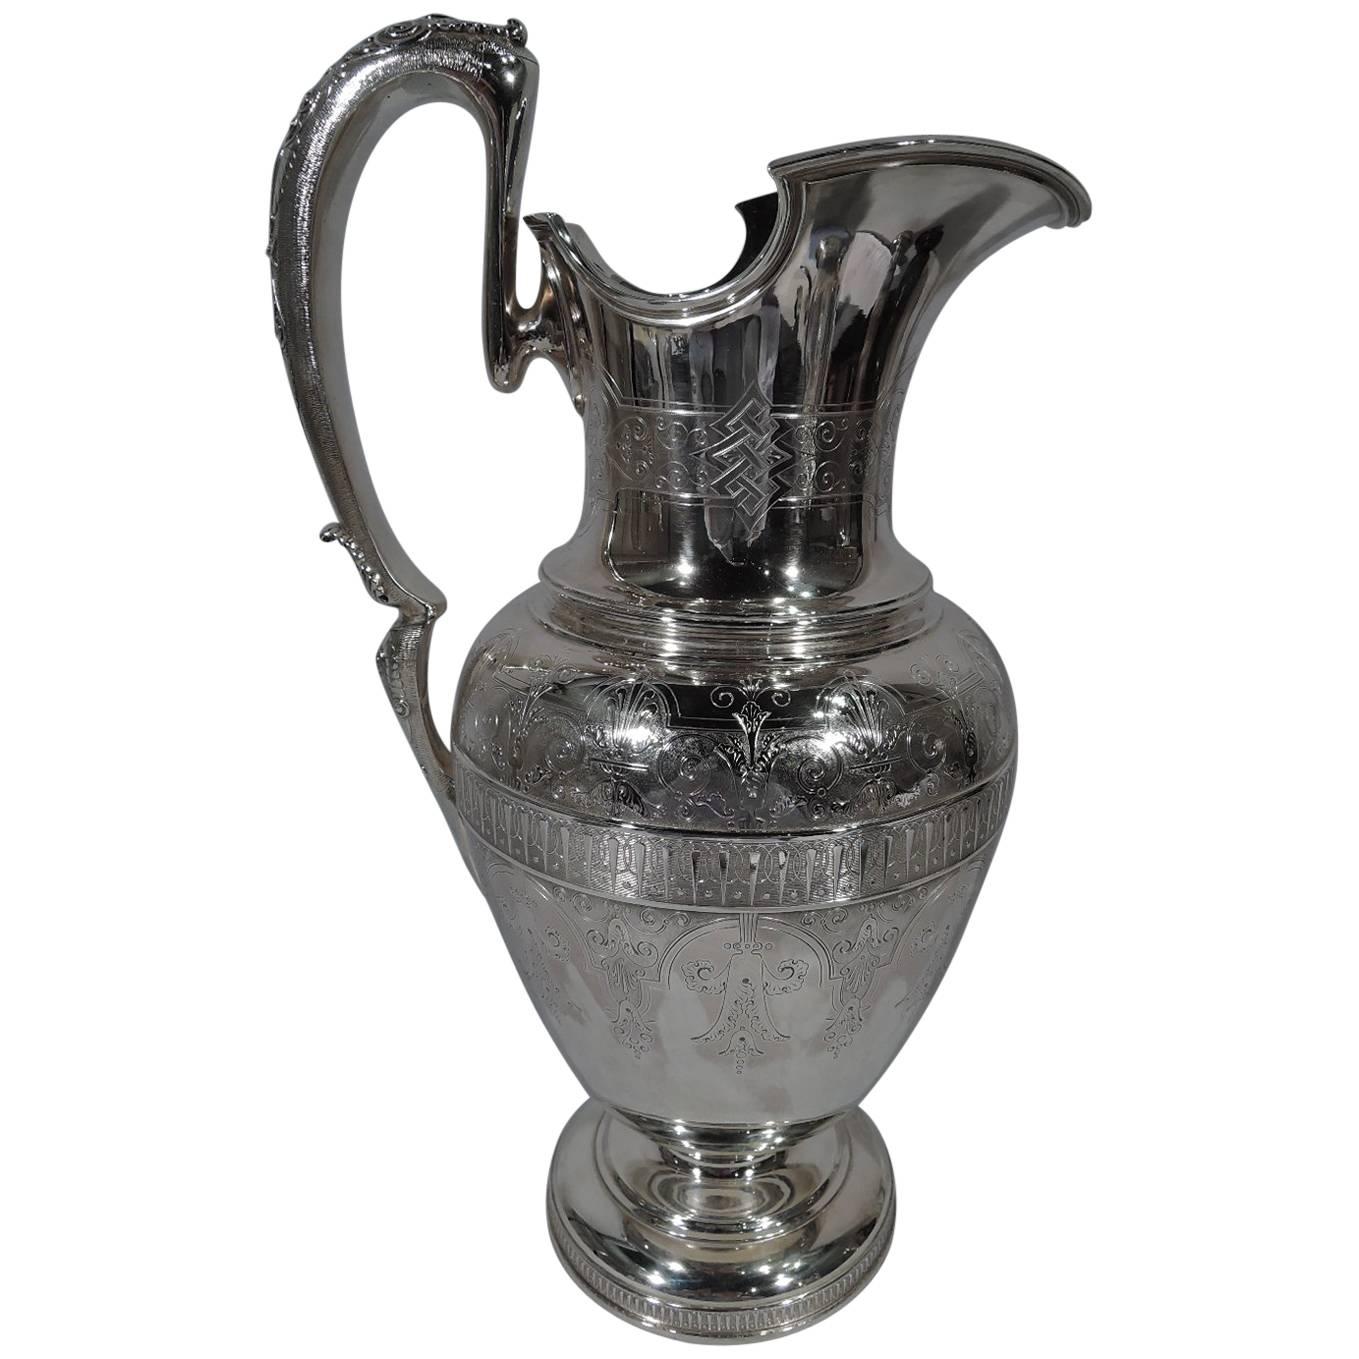 Tiffany Classical Sterling Silver Ewer with Early Broadway Hallmark